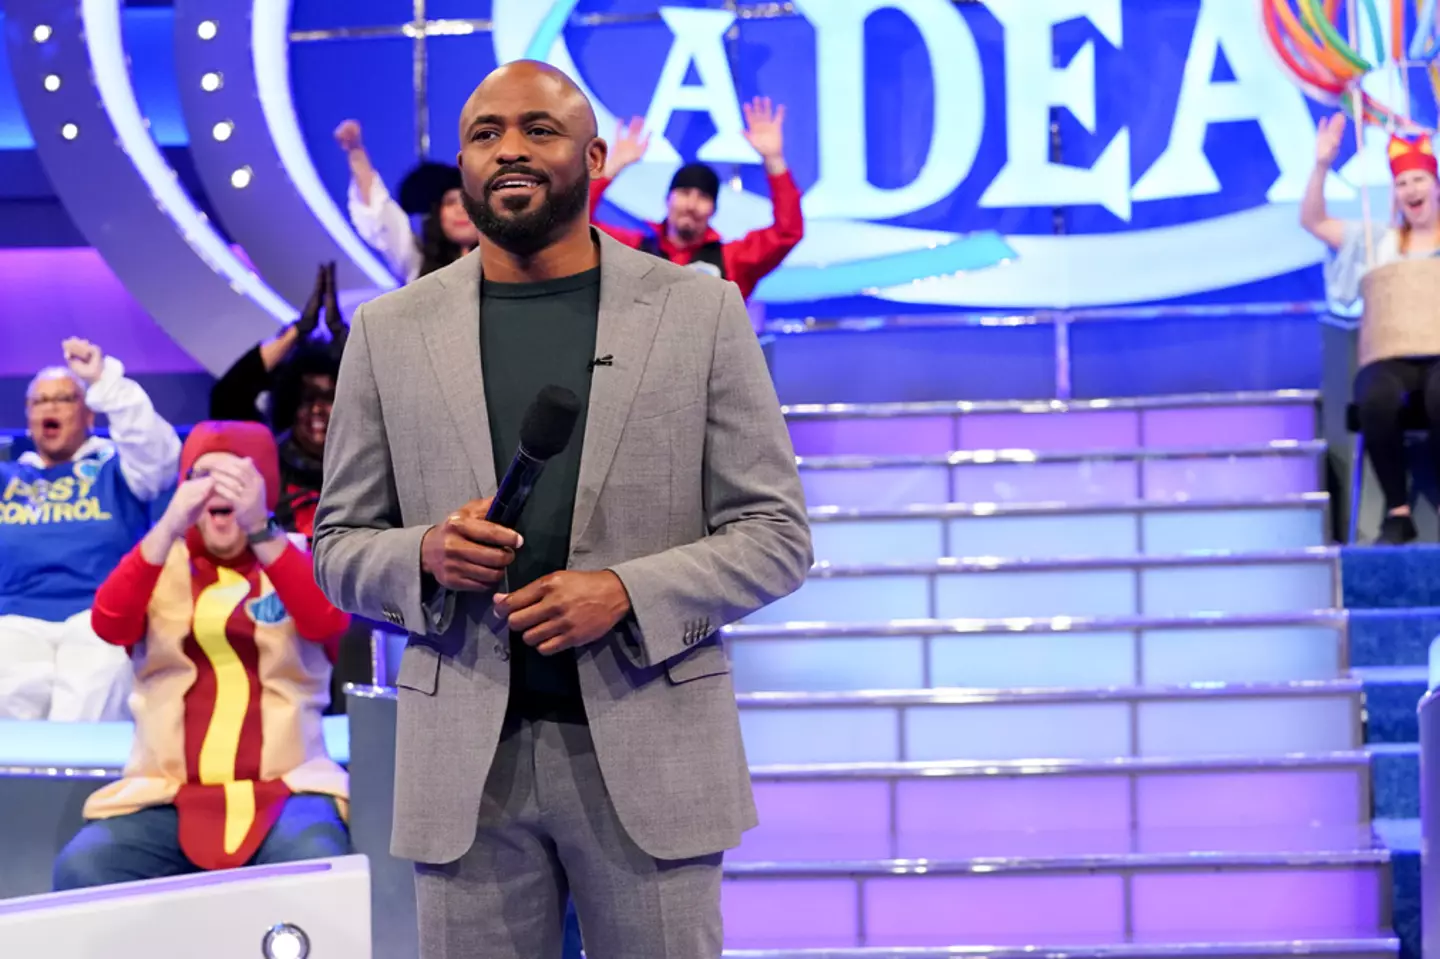 The Let's Make A Deal host first came out to his ex-wife.